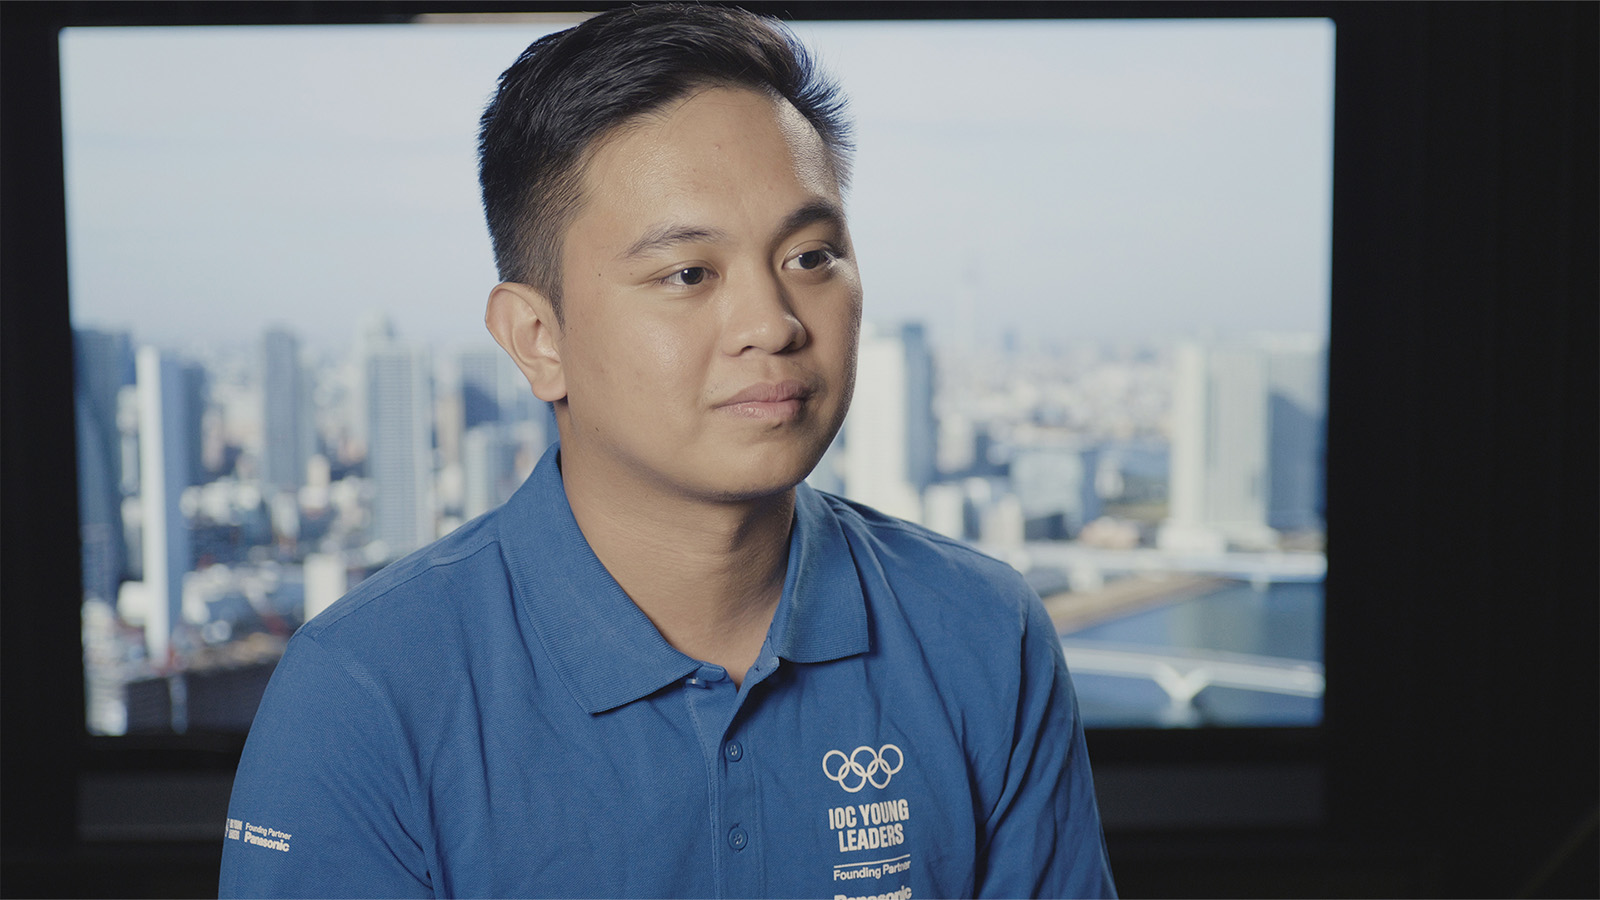 Photo: Alfonso, an IOC Young Leader who was offered an internship at Panasonic.